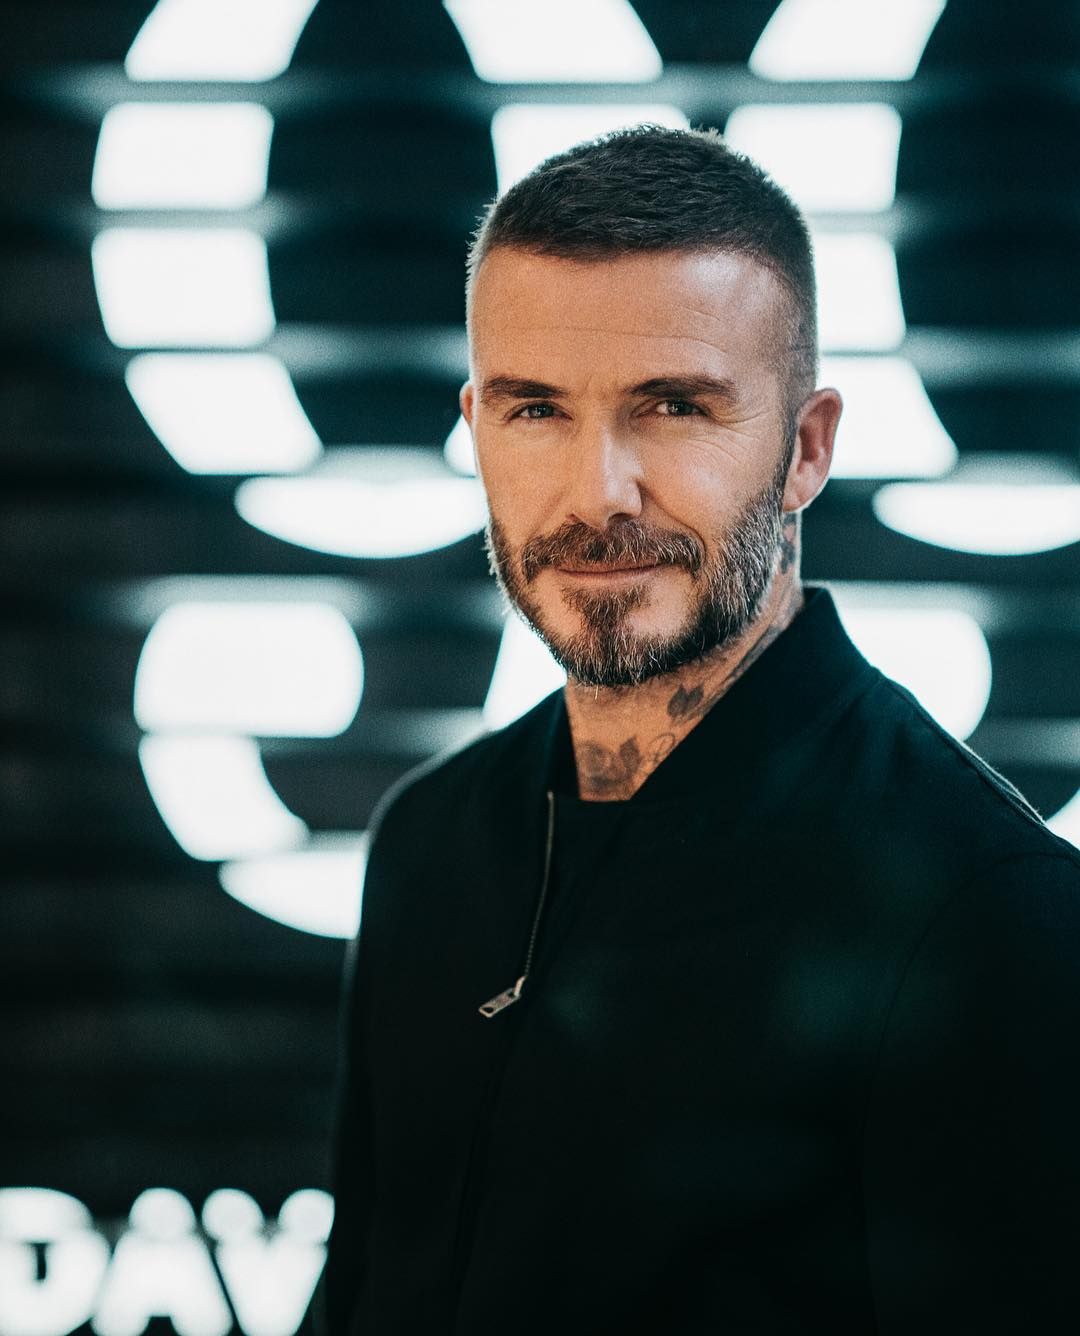 HOUSE 99 BY DAVID BECKHAM on Instagram: “Textured crew cut inspiration from the man of the House, @davidbeckham. Products used: ✔️Hair: CHANGE IT UP Texturising Clay. ✔️Beard:…”